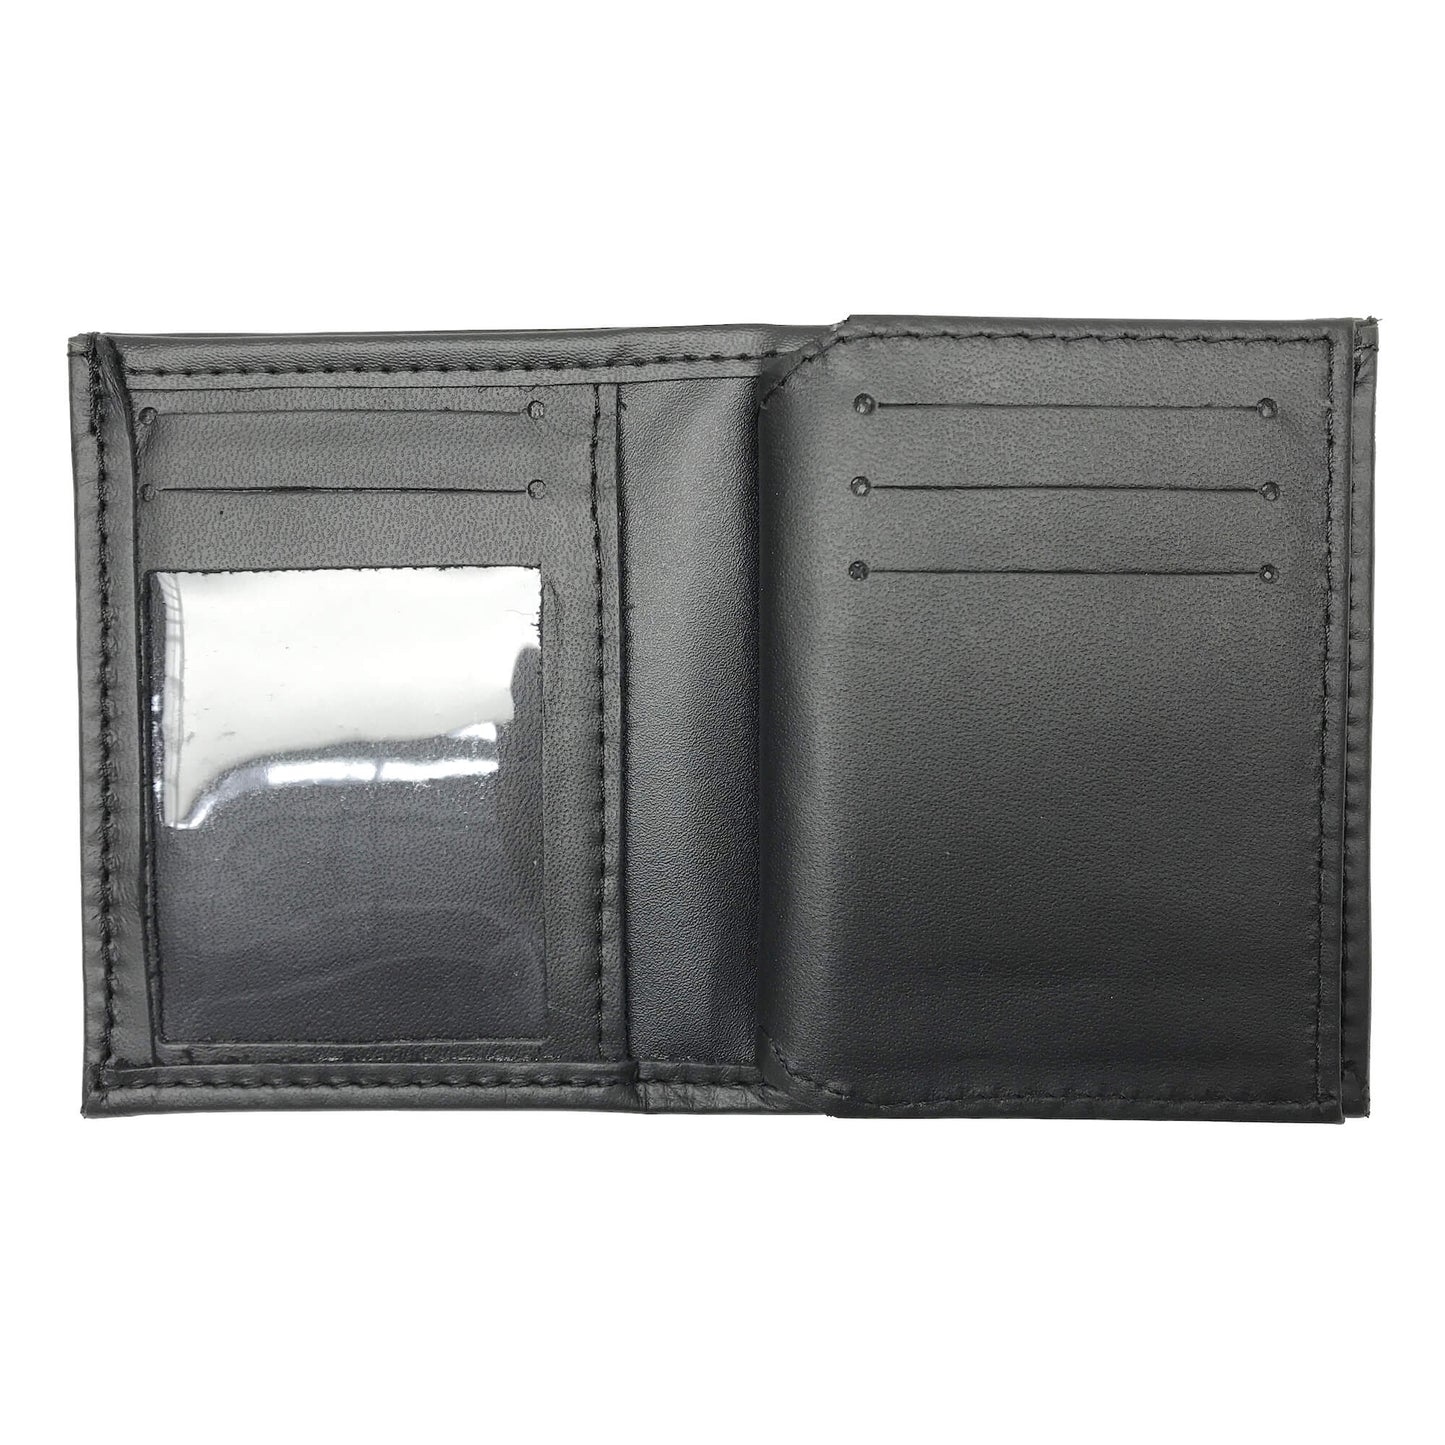 Fort Worth Police Bifold Hidden Badge Wallet-Perfect Fit-911 Duty Gear USA